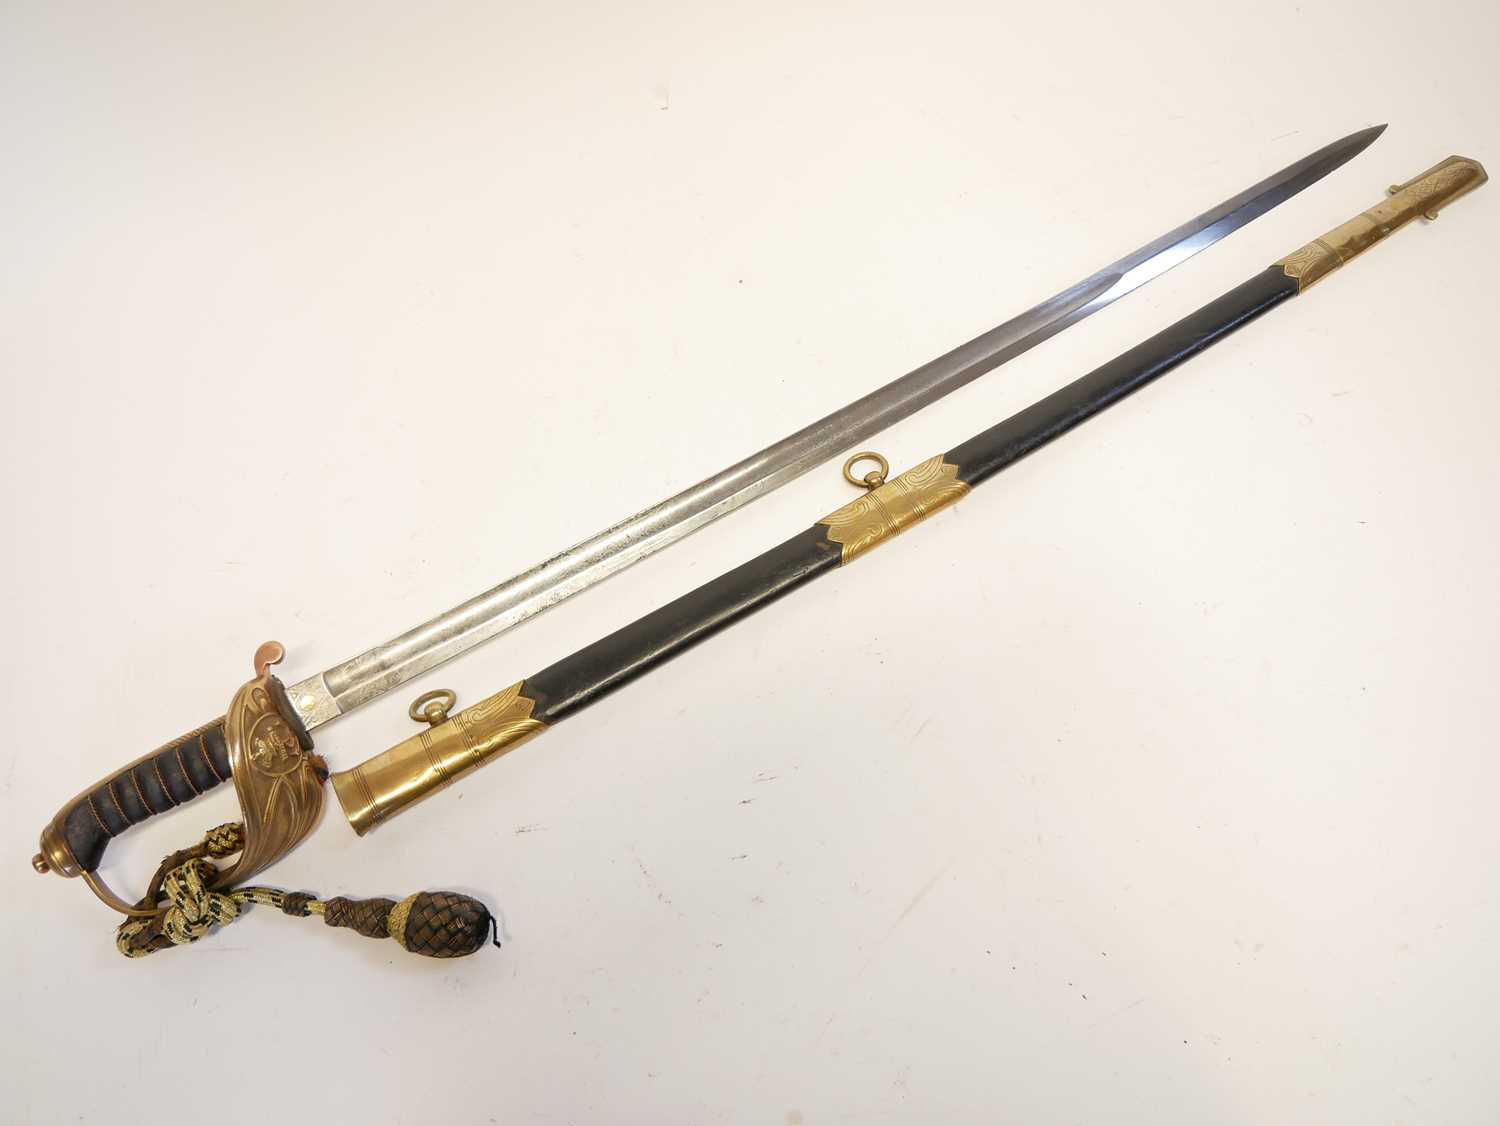 Royal Navy Petty Officer's sword, similar to an 1827 Naval sword but without the lion head pommel, - Image 2 of 16